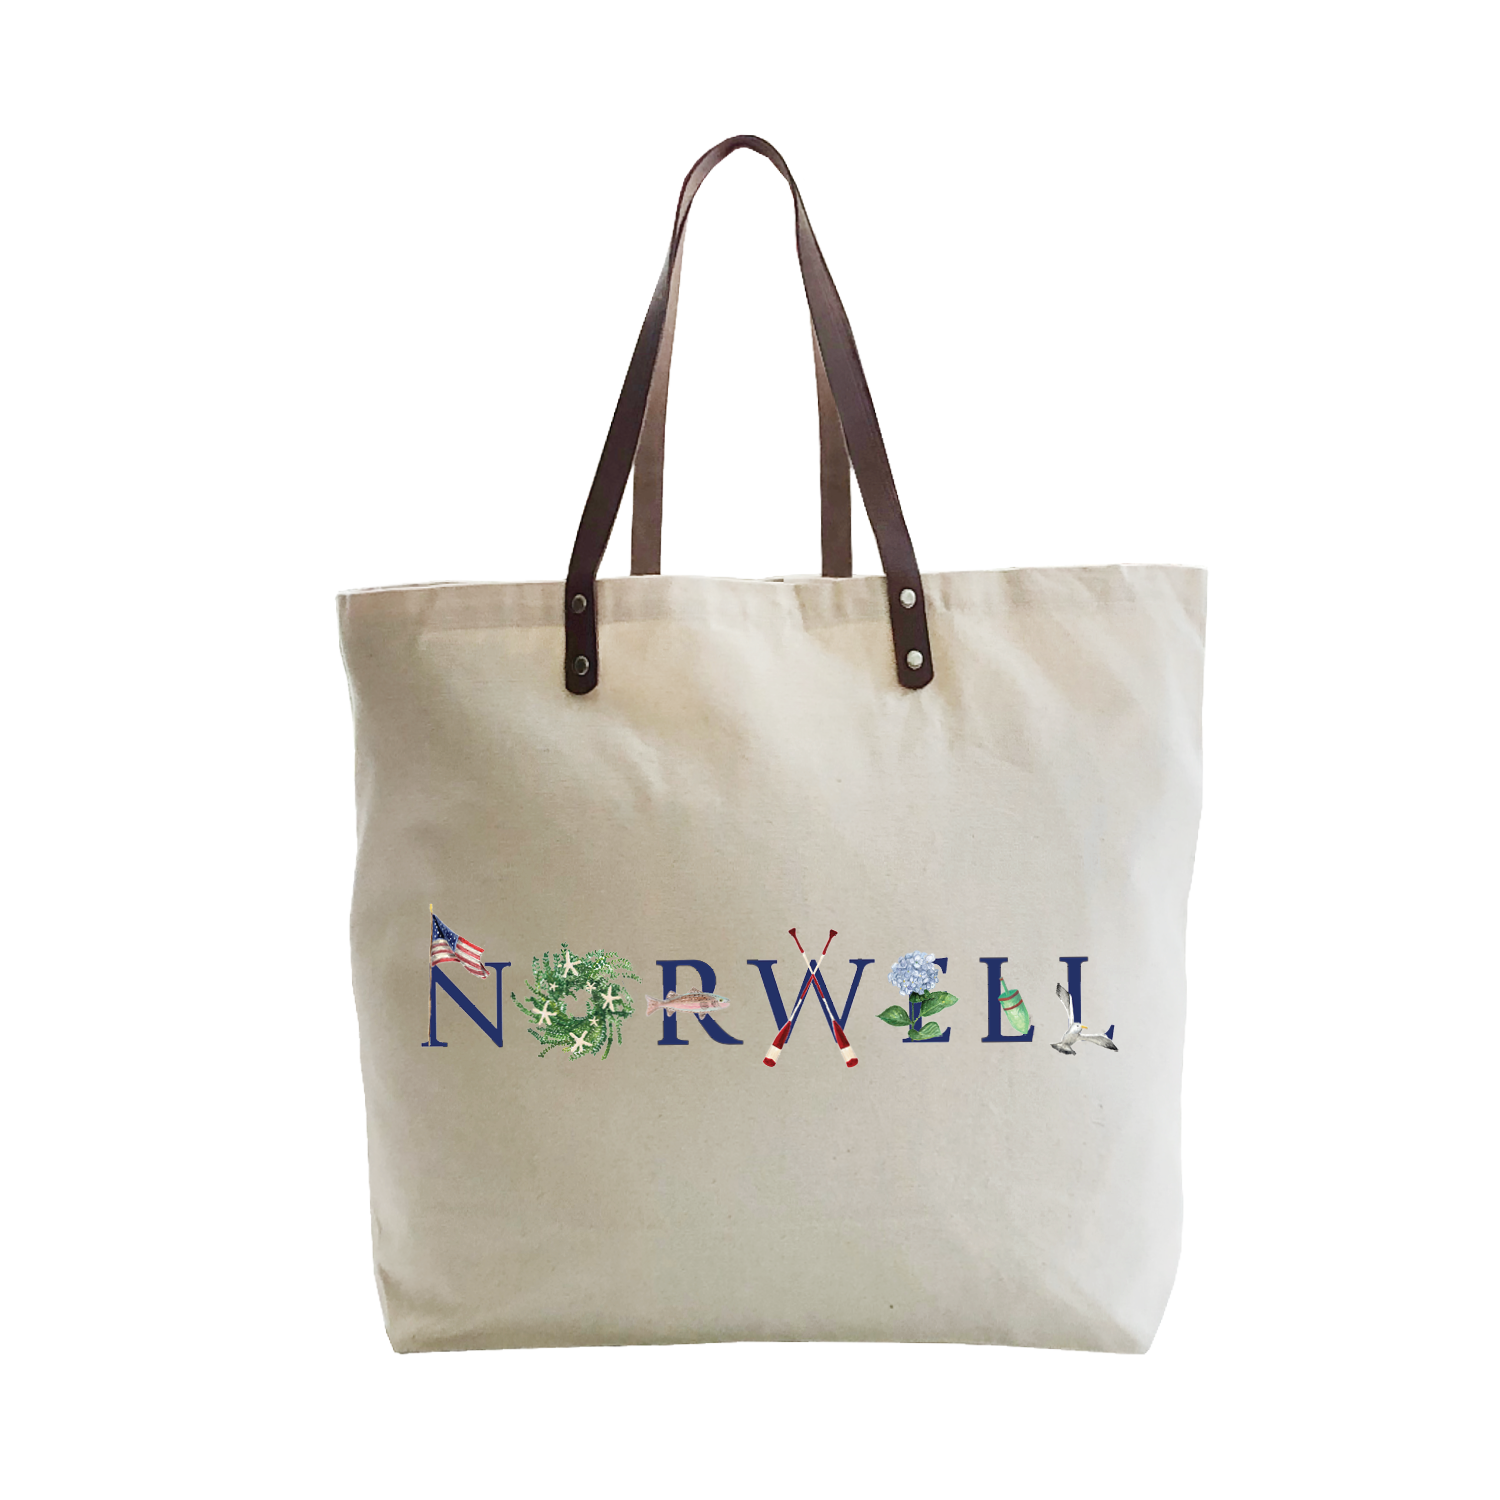 norwell large tote